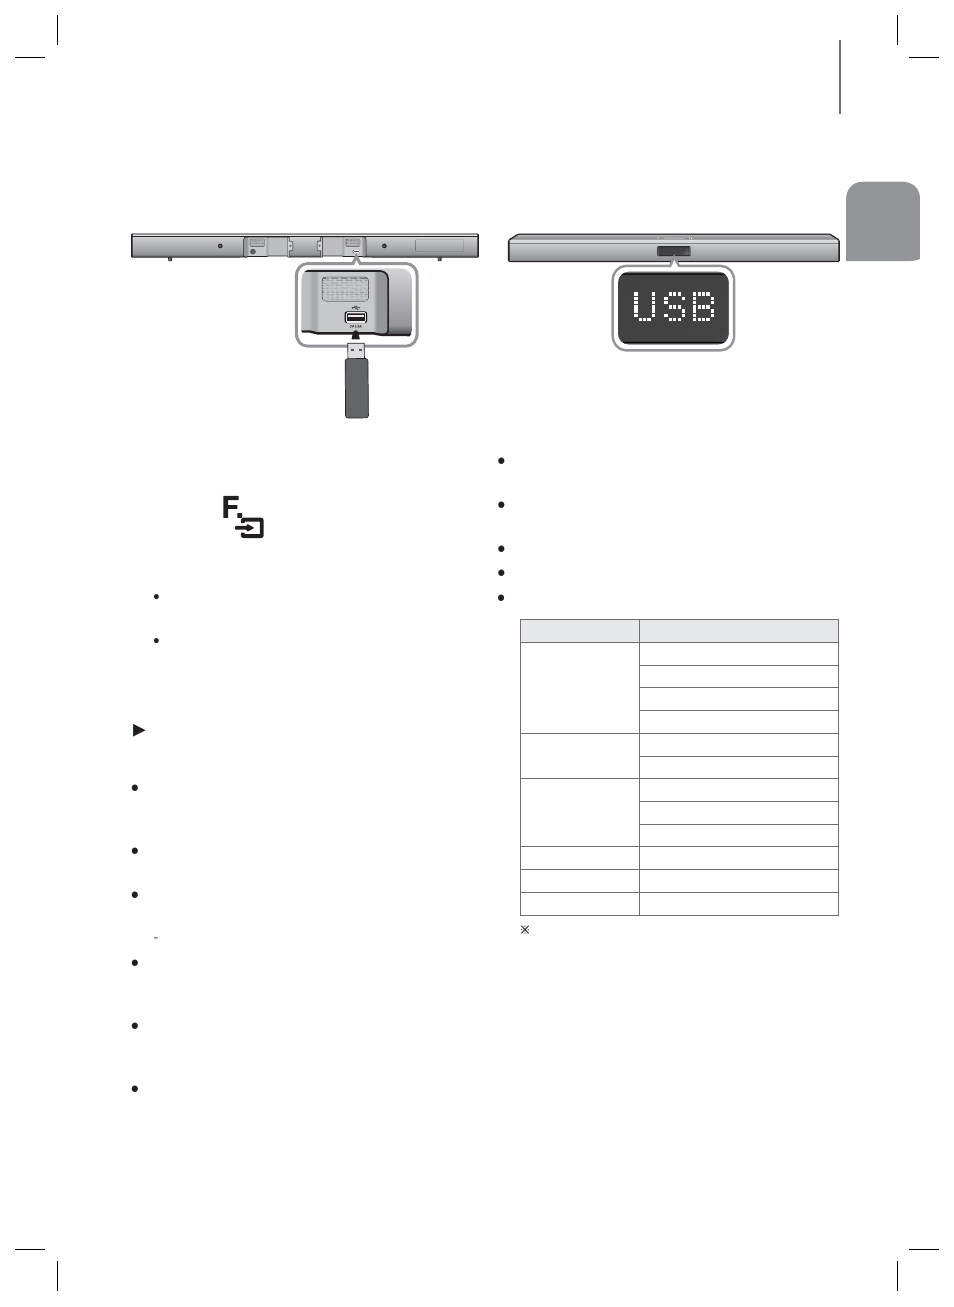 Before you connect a usb device | Samsung HW-HM45-ZA User Manual | Page